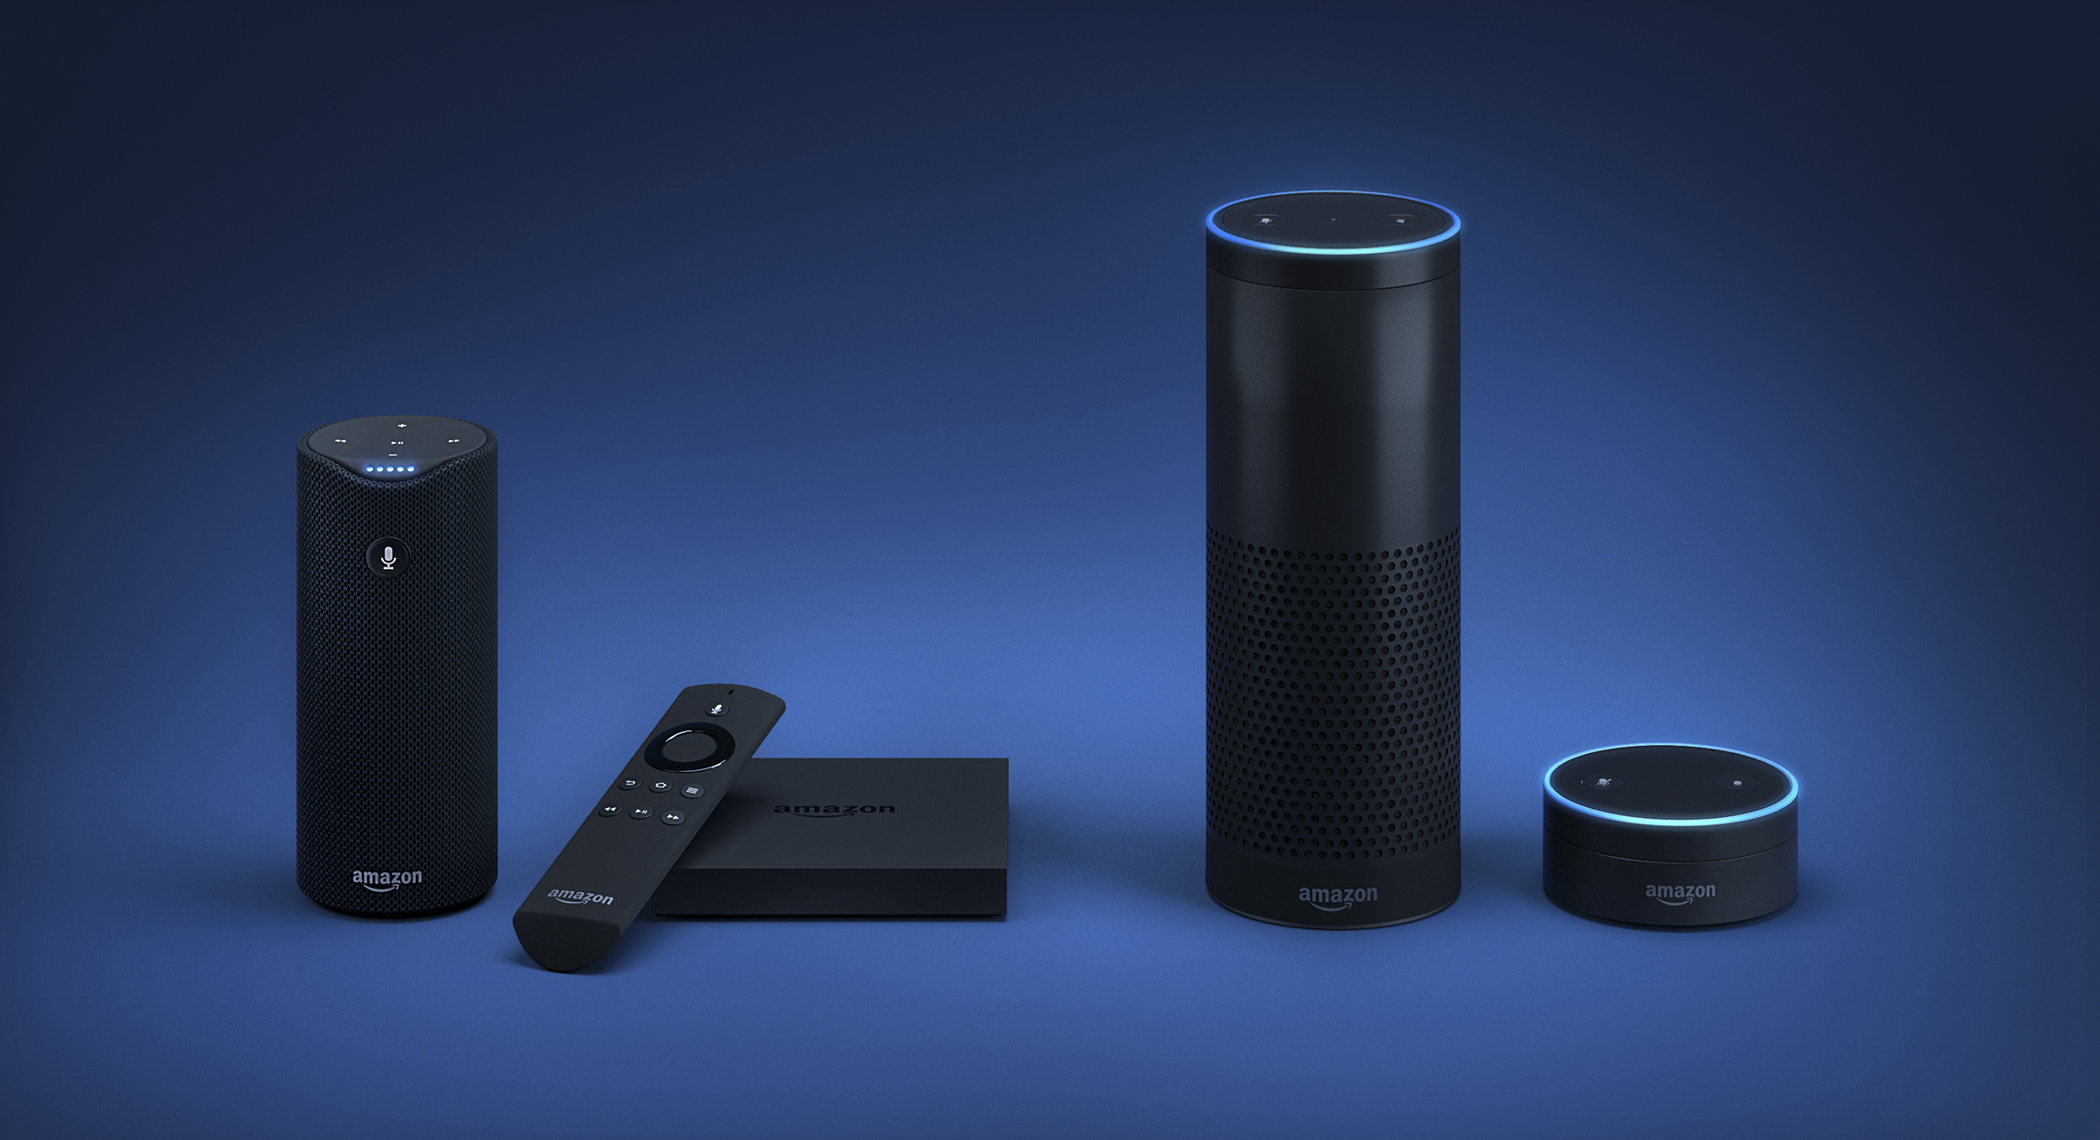 Amazon is Planning to Release At Least 8 New Alexa-powered Devices This Year